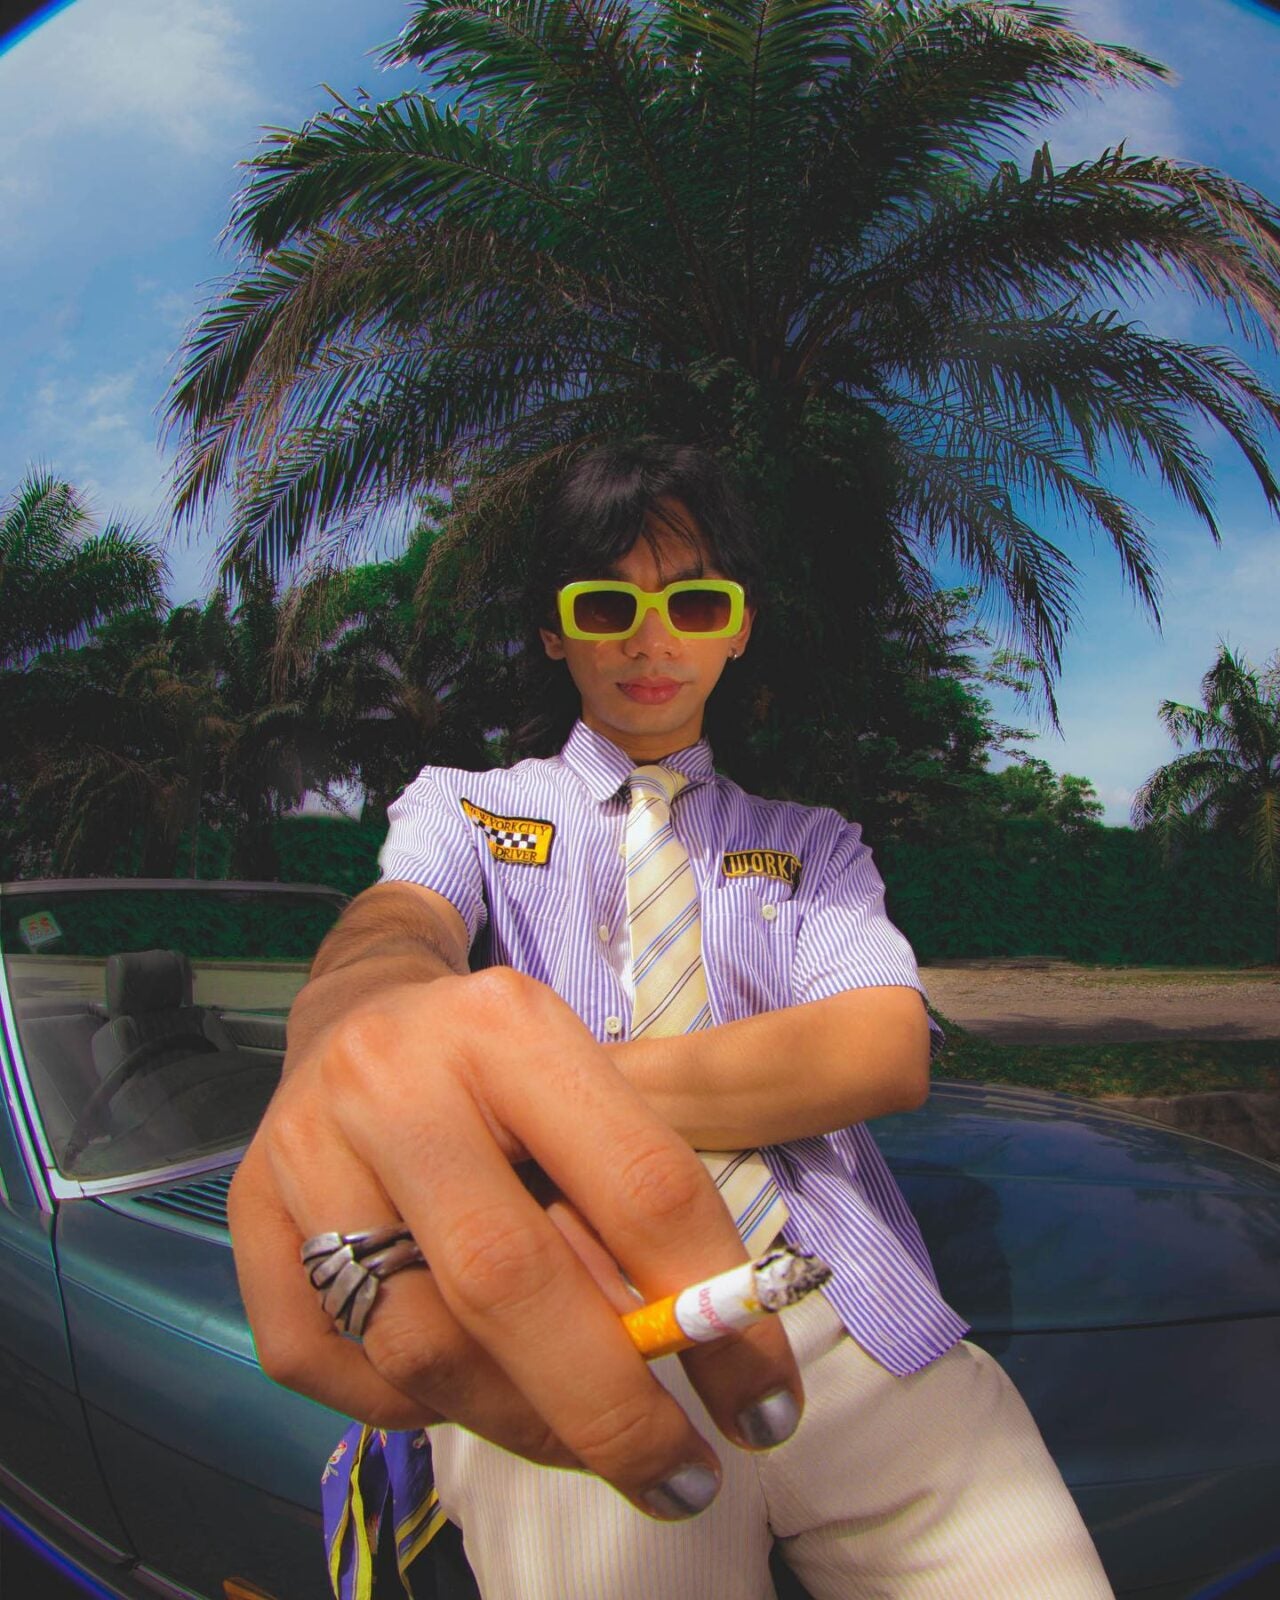 Muaz Rabbani wearing yellow sunglasses and posing with a cigarette in his hand for the album pictures of his band, Midnight Fusic.